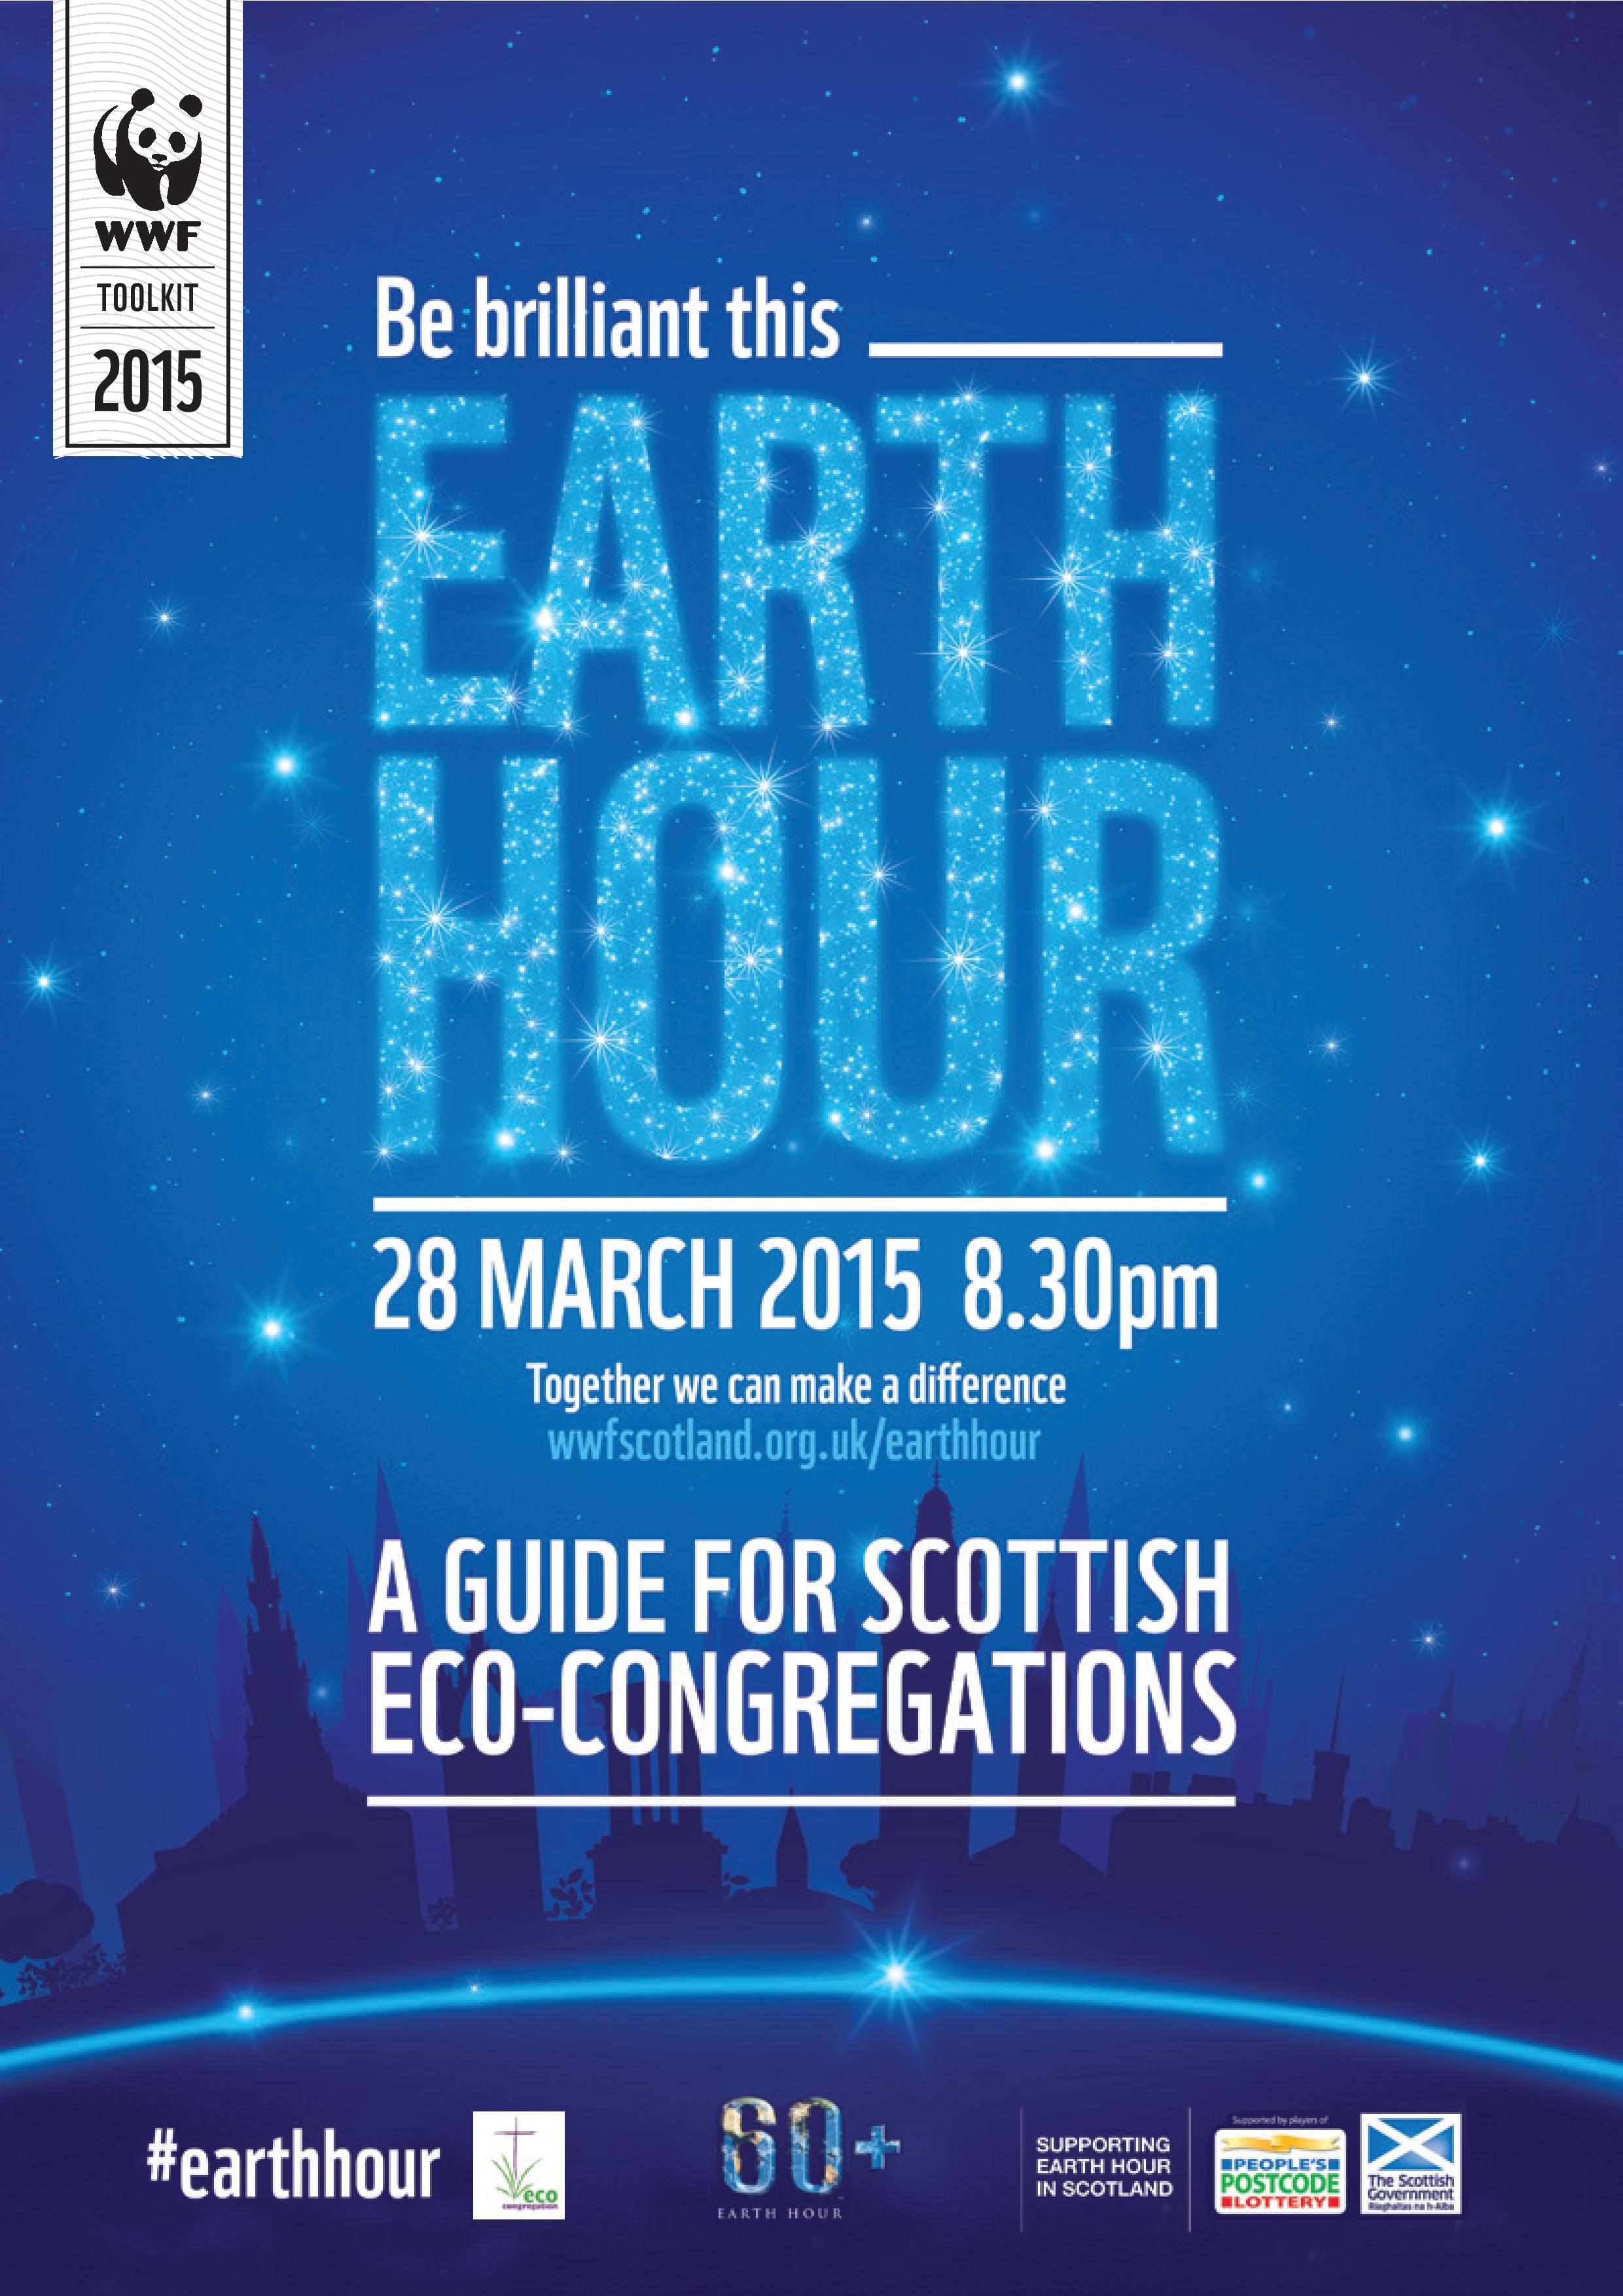 Earth Hour 2015 information pack for churches launched. | Eco.